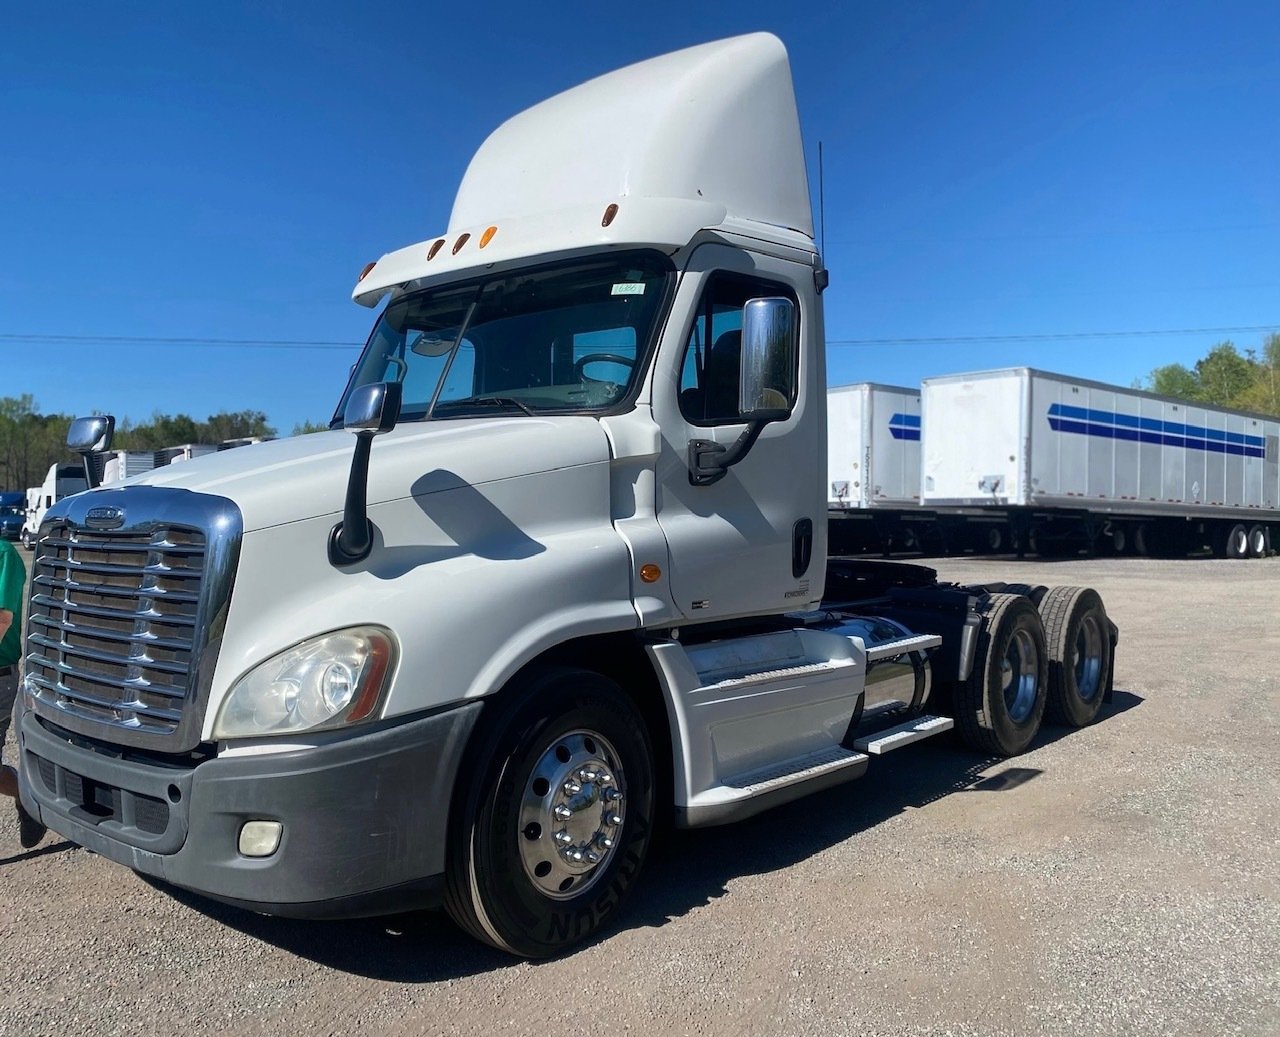 USED 2012 FREIGHTLINER CASCADIA TANDEM AXLE DAYCAB TRUCK #15294